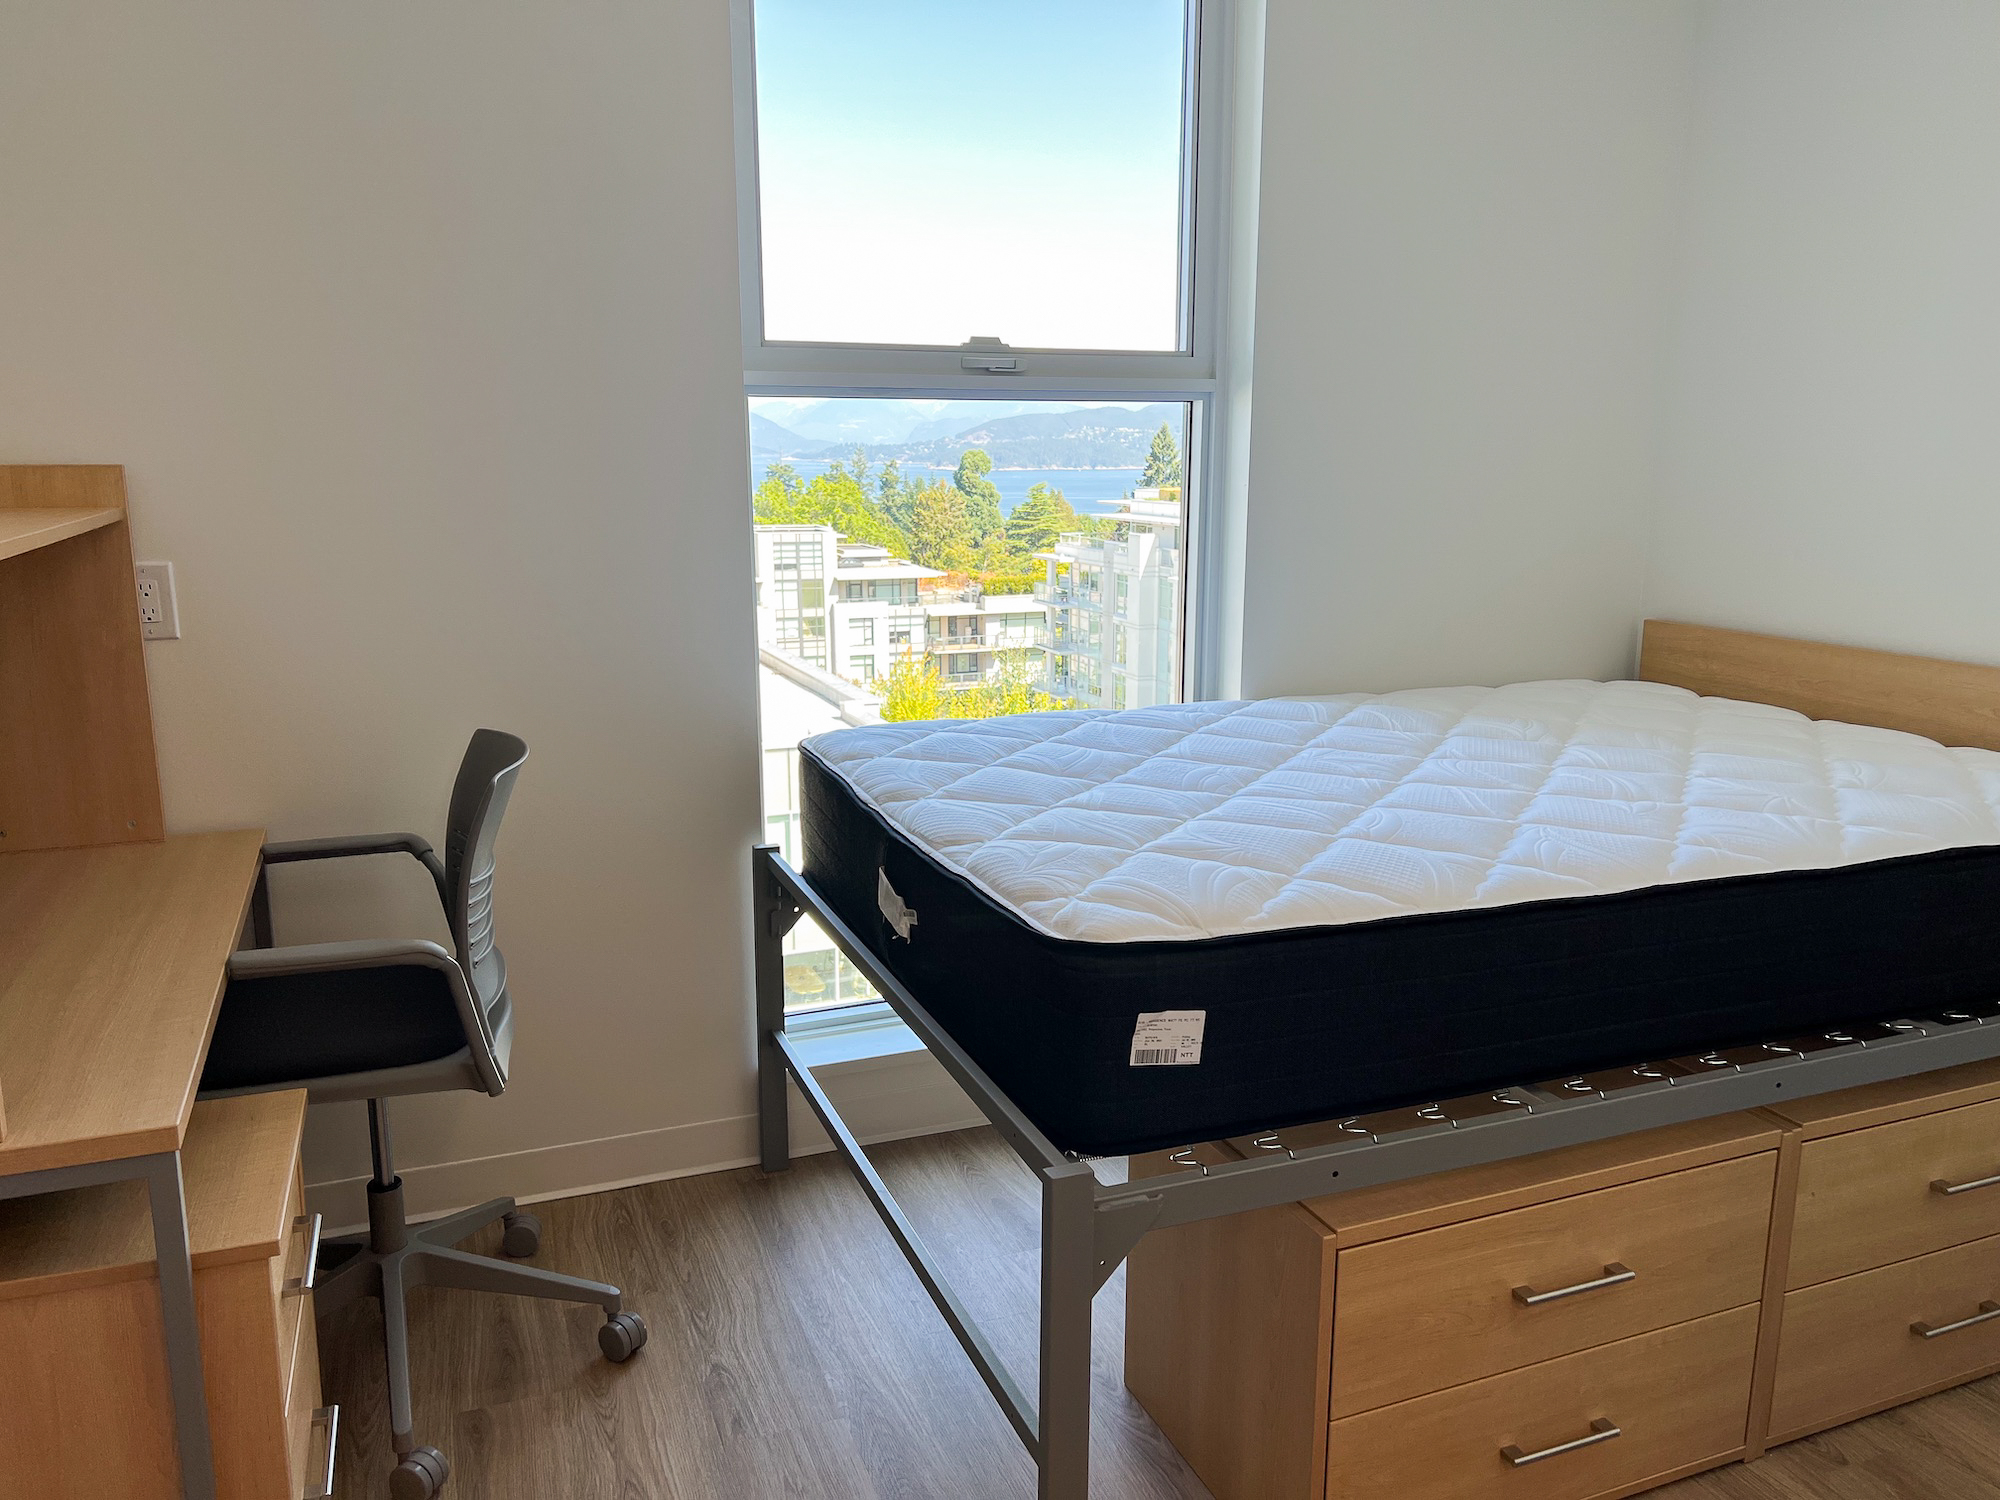 Interior of a room in the new Brock Commons North building. The room is on a higher floor that has an elevated bed with a row of drawers underneath on the right corner. On the left corner, there is a desk and a rolling hair. The window in the room overlooks a few other residential buildings and looks to the Burrard Inlet.